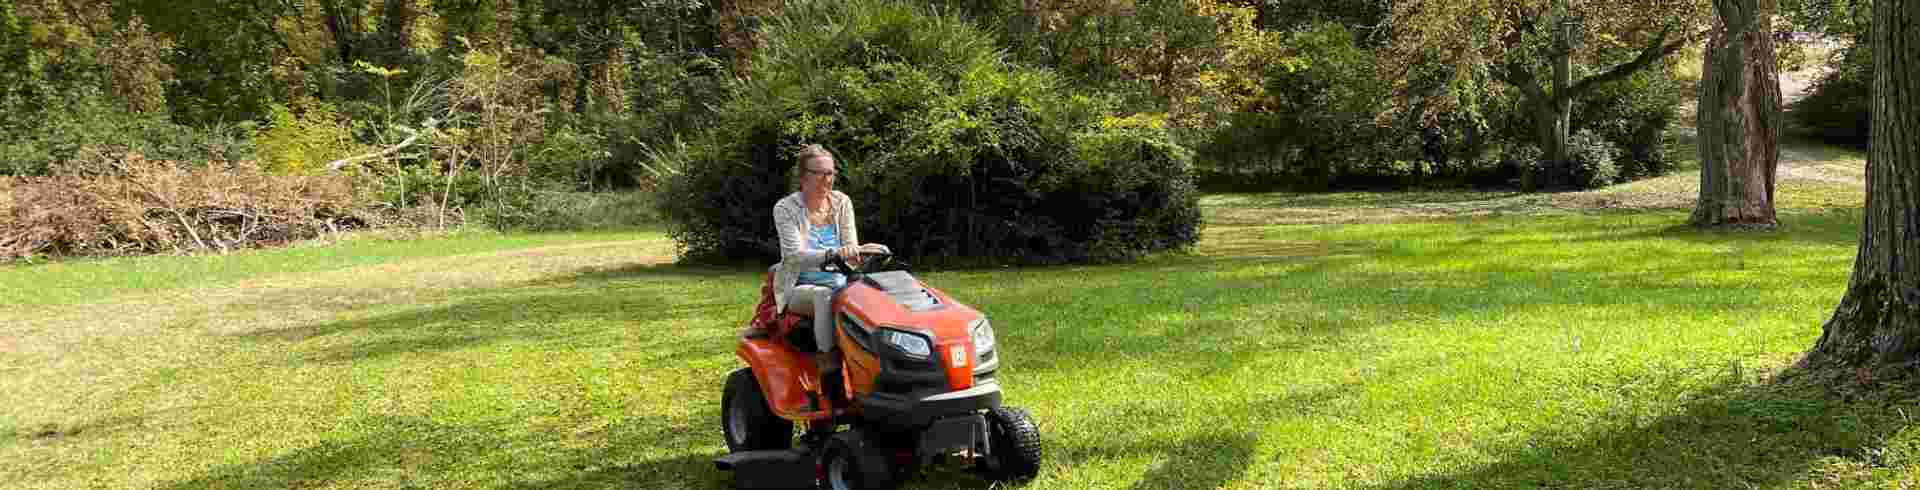 The Sunnyside Sisters Bed and Breakfast / Clarksville VA / E on the lawnmower having fun